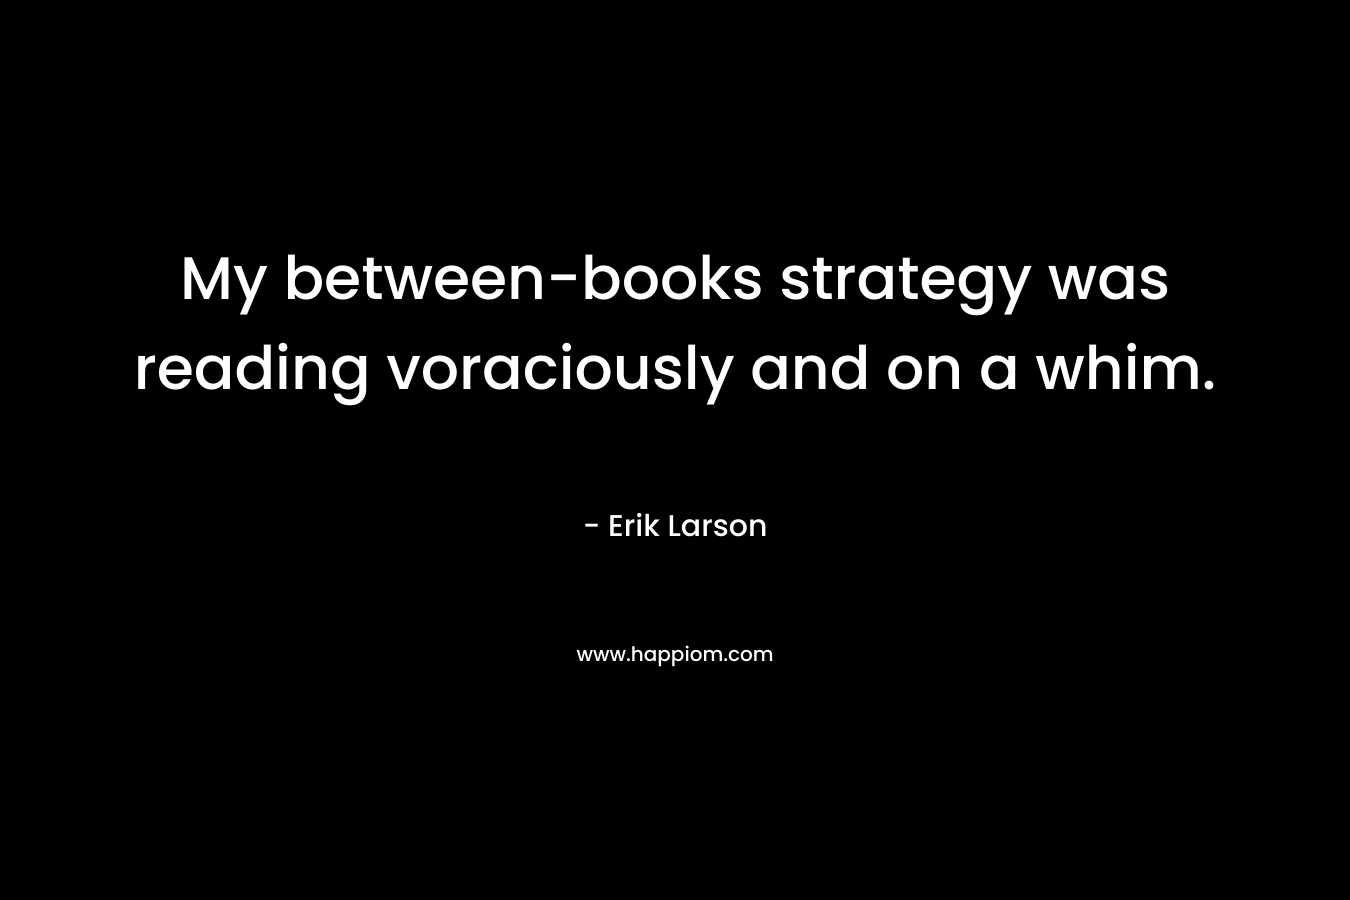 My between-books strategy was reading voraciously and on a whim. – Erik Larson